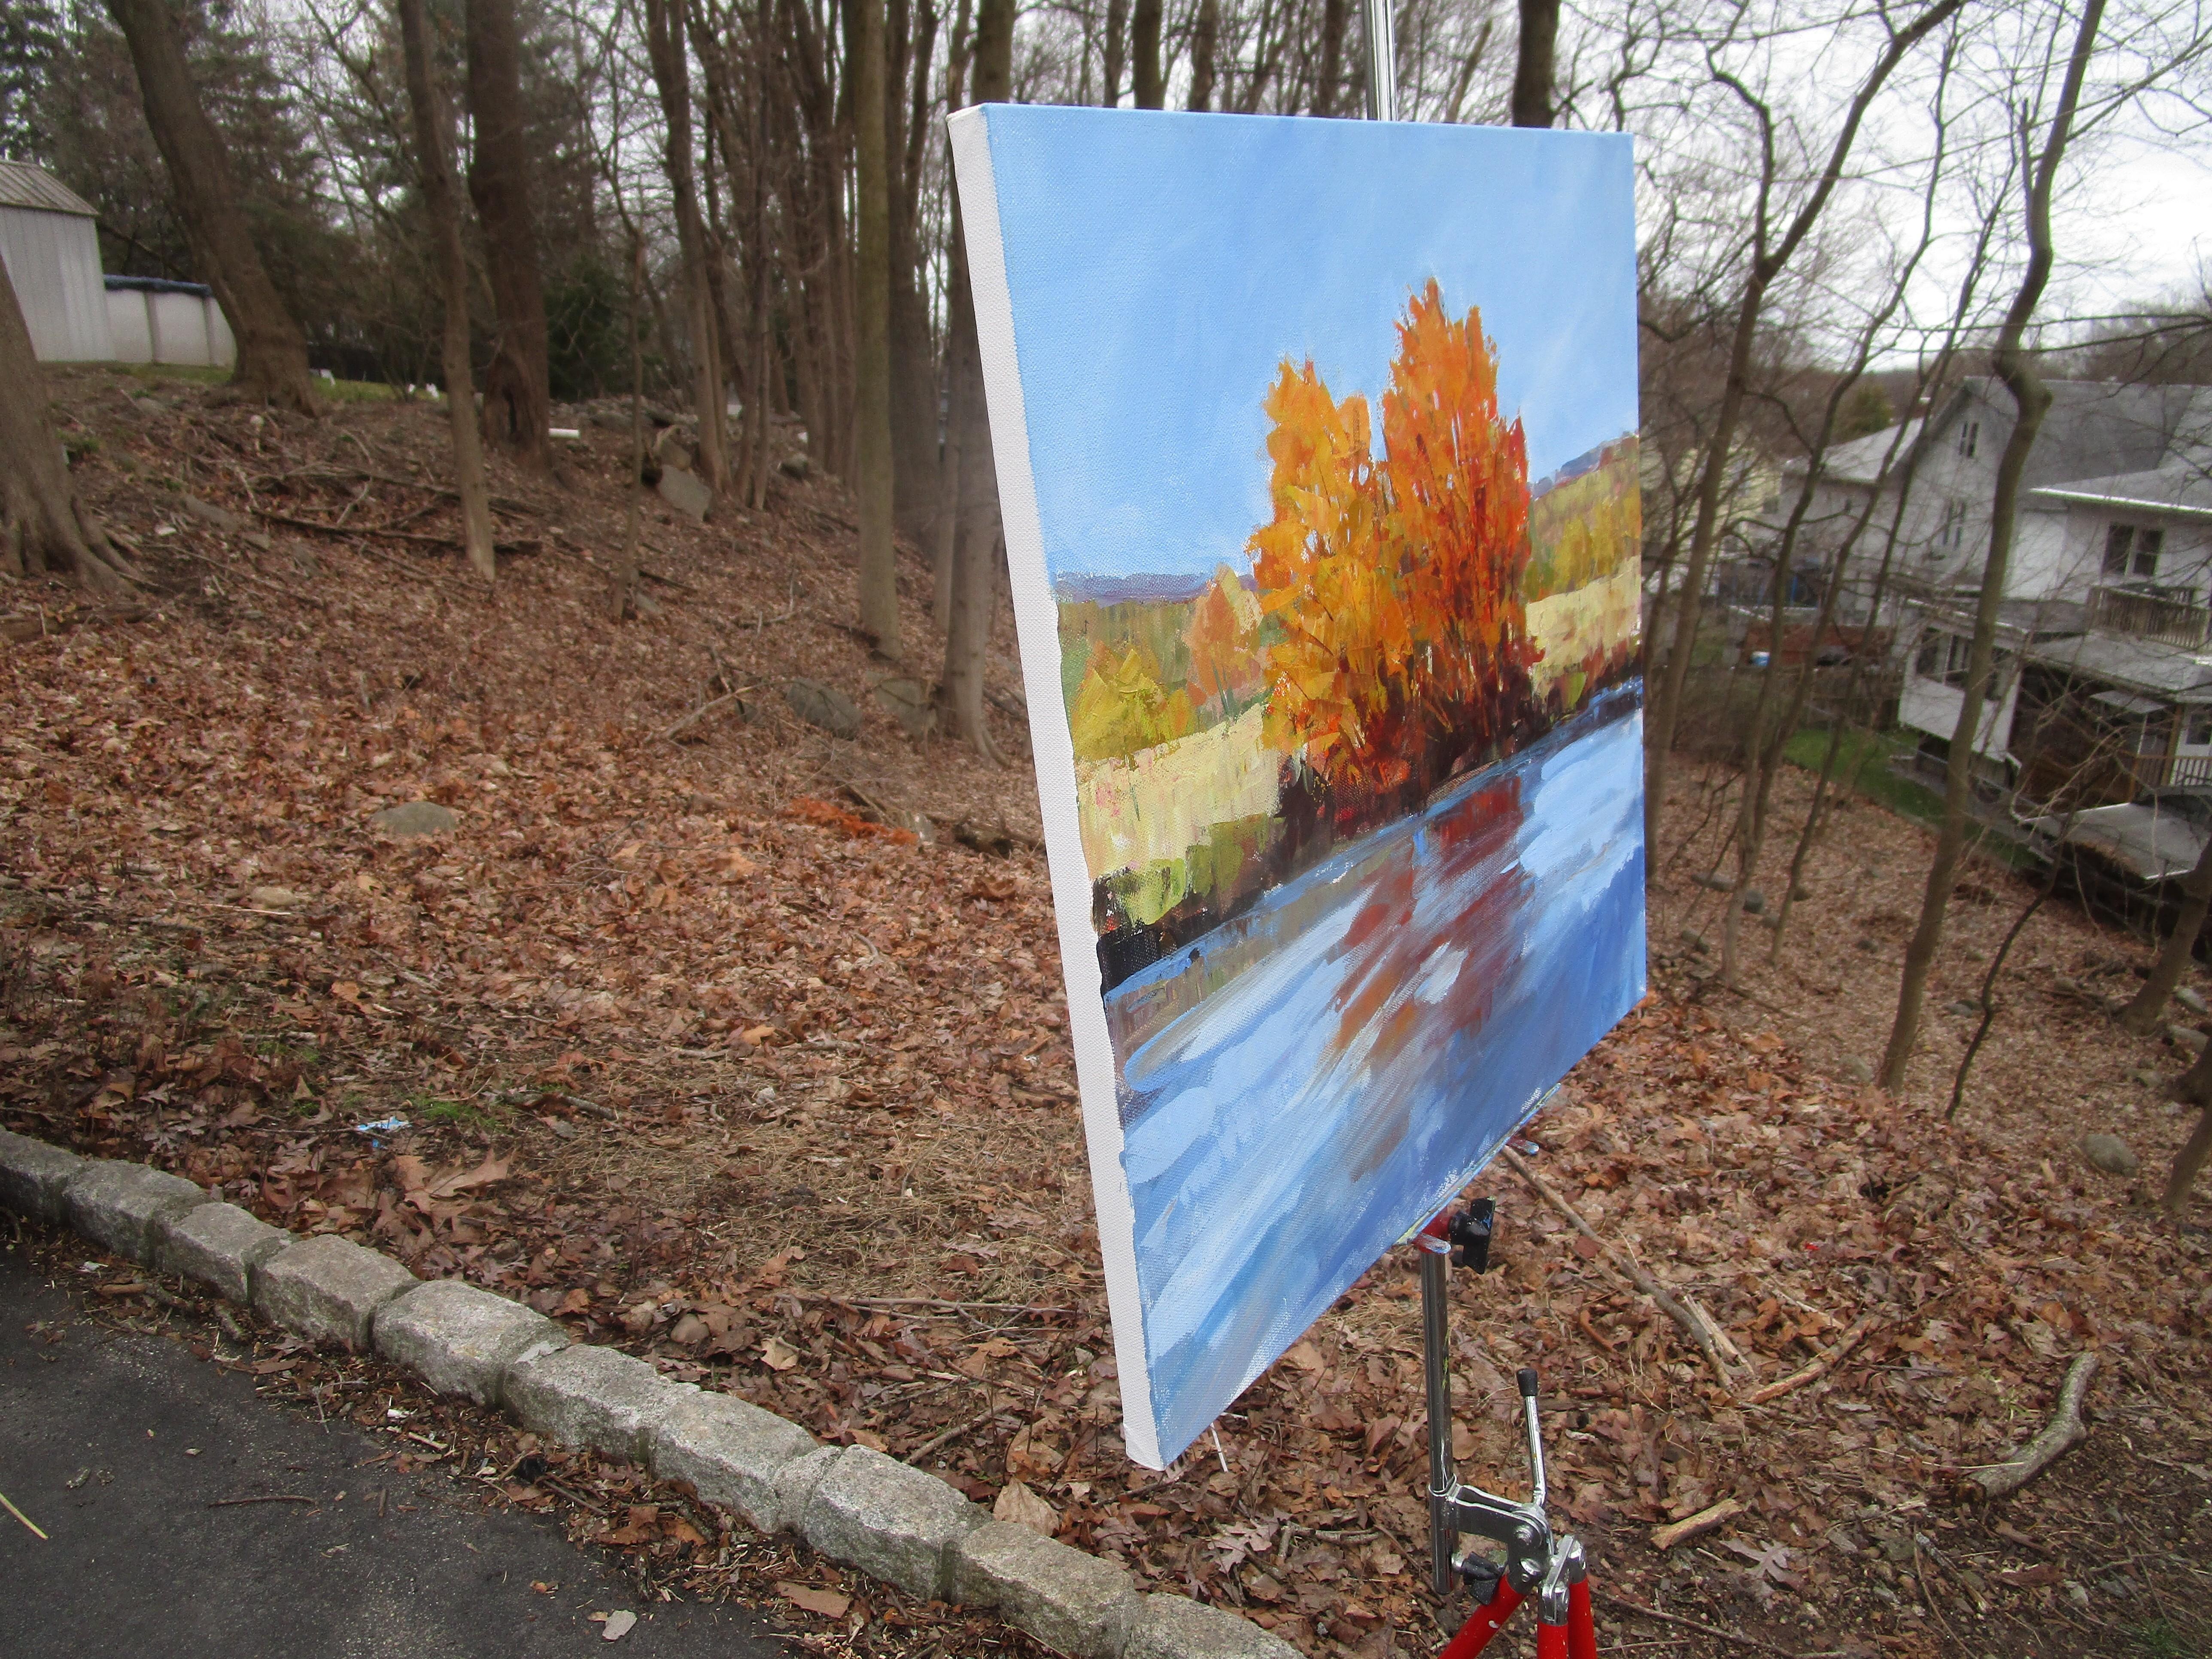 <p>Artist Comments<br>The fiery hues of the autumn trees contrast beautifully with the cool tones of the stream. The swift course of the water distorts the reflection of the gently rustling leaves. The composition conveys a sense of harmony between